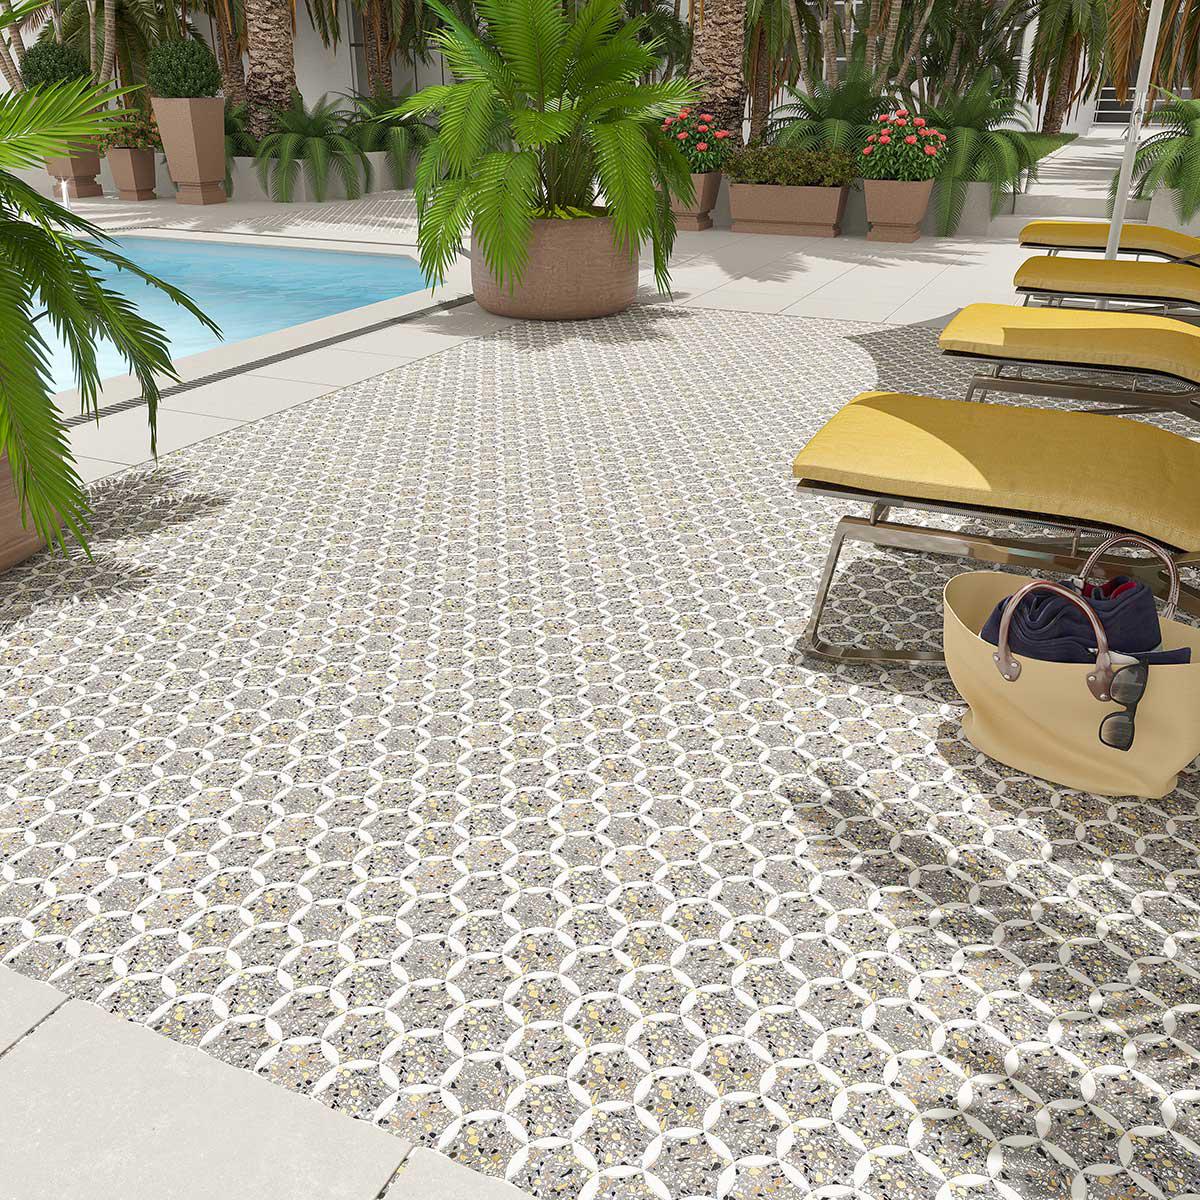 Hotel pool deck floor with speckled terrazzo mosaic tiles